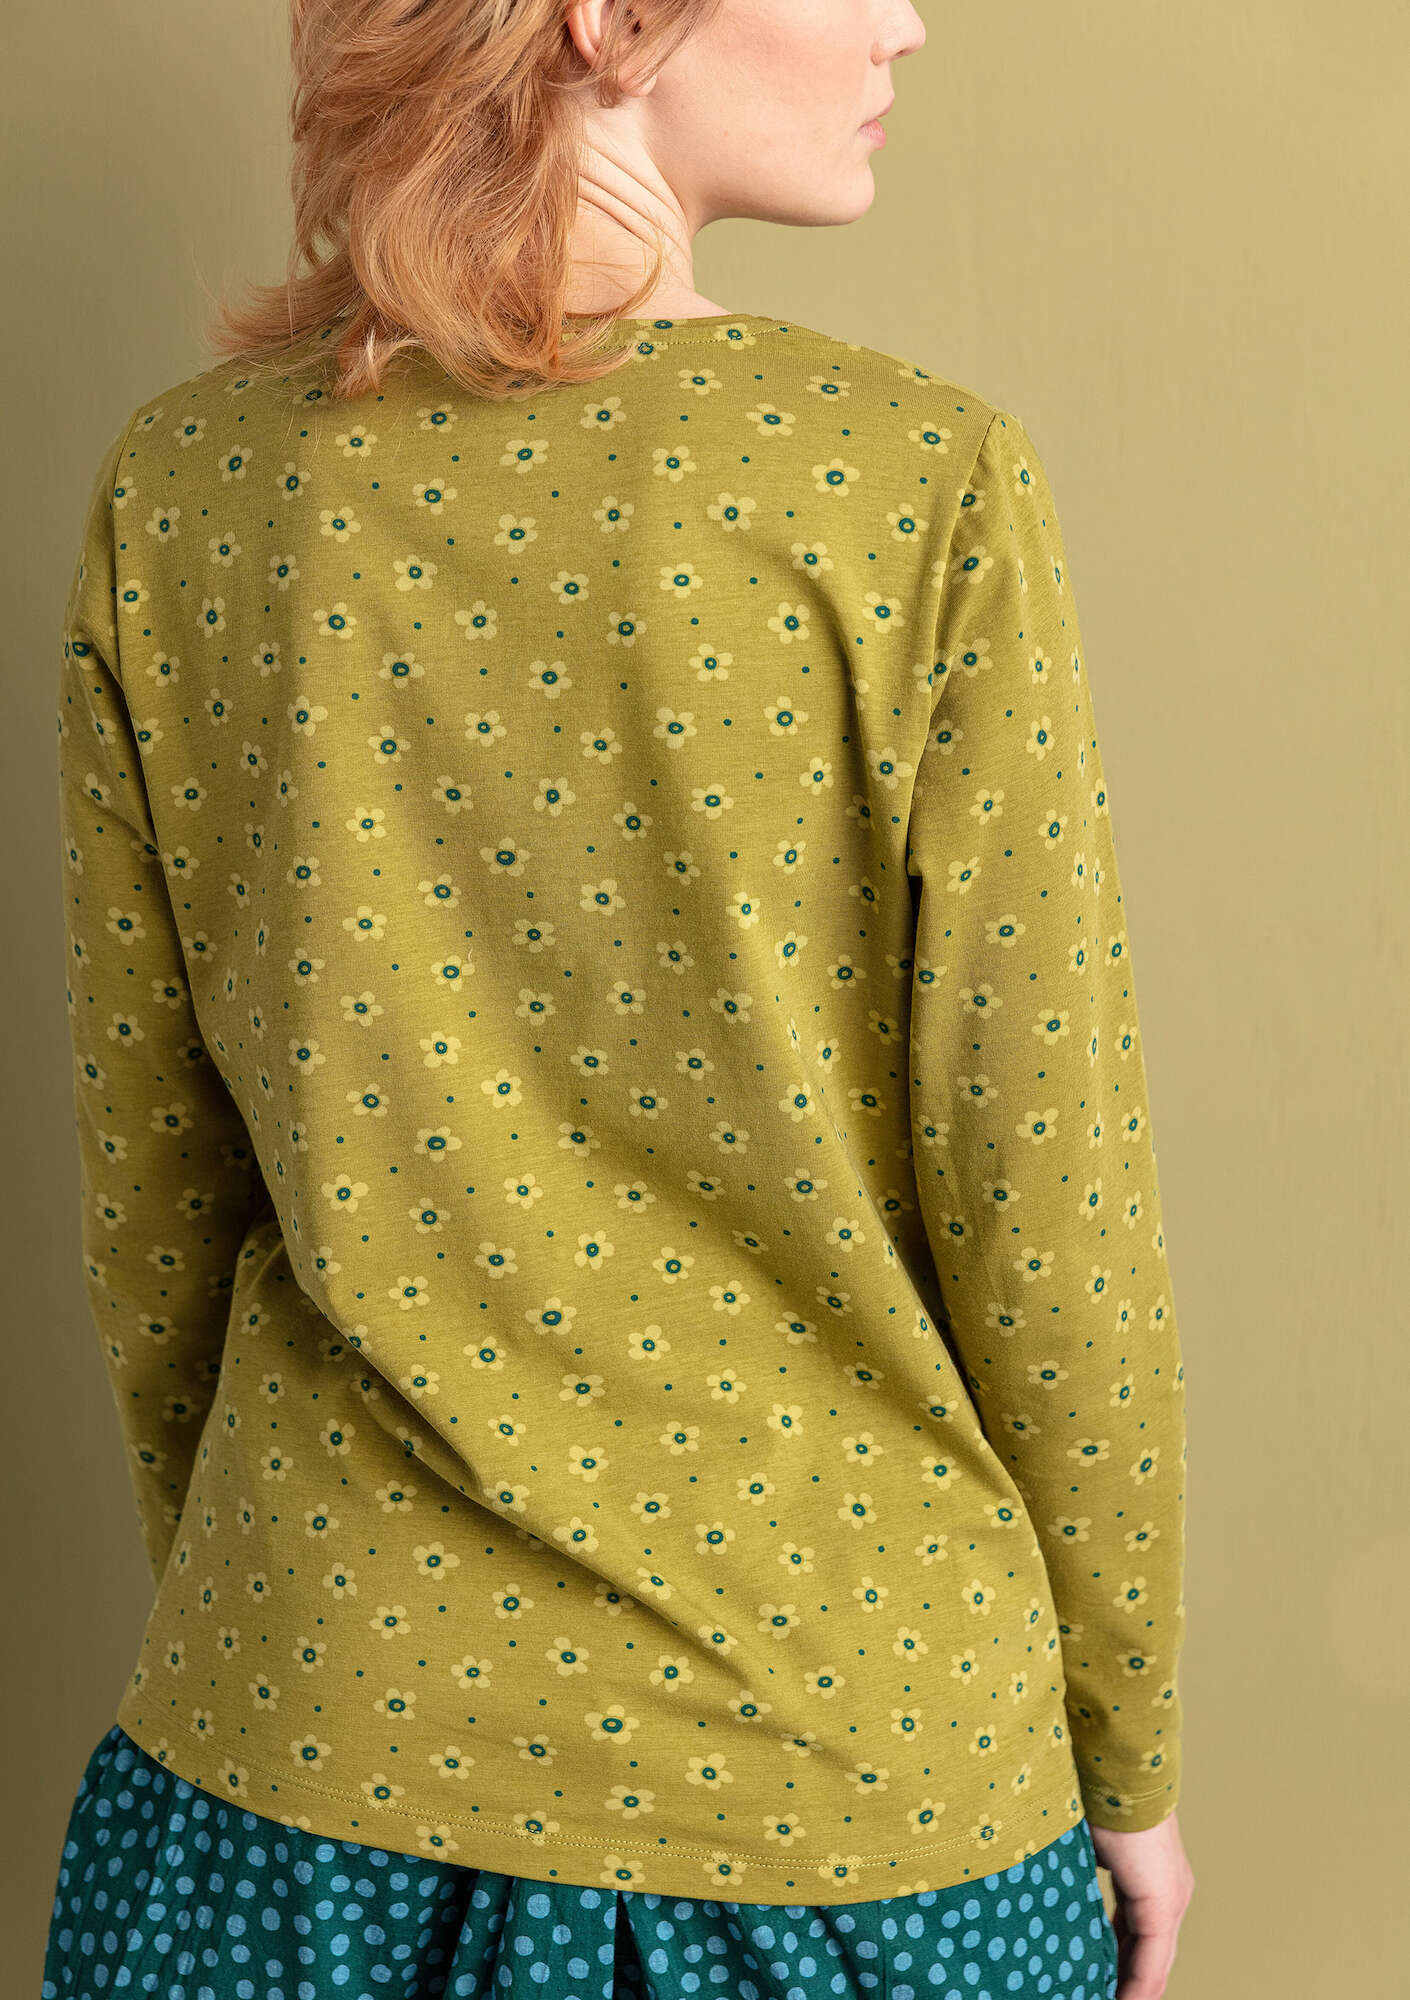 “Pytte” jersey top in organic cotton/spandex avocado/patterned thumbnail